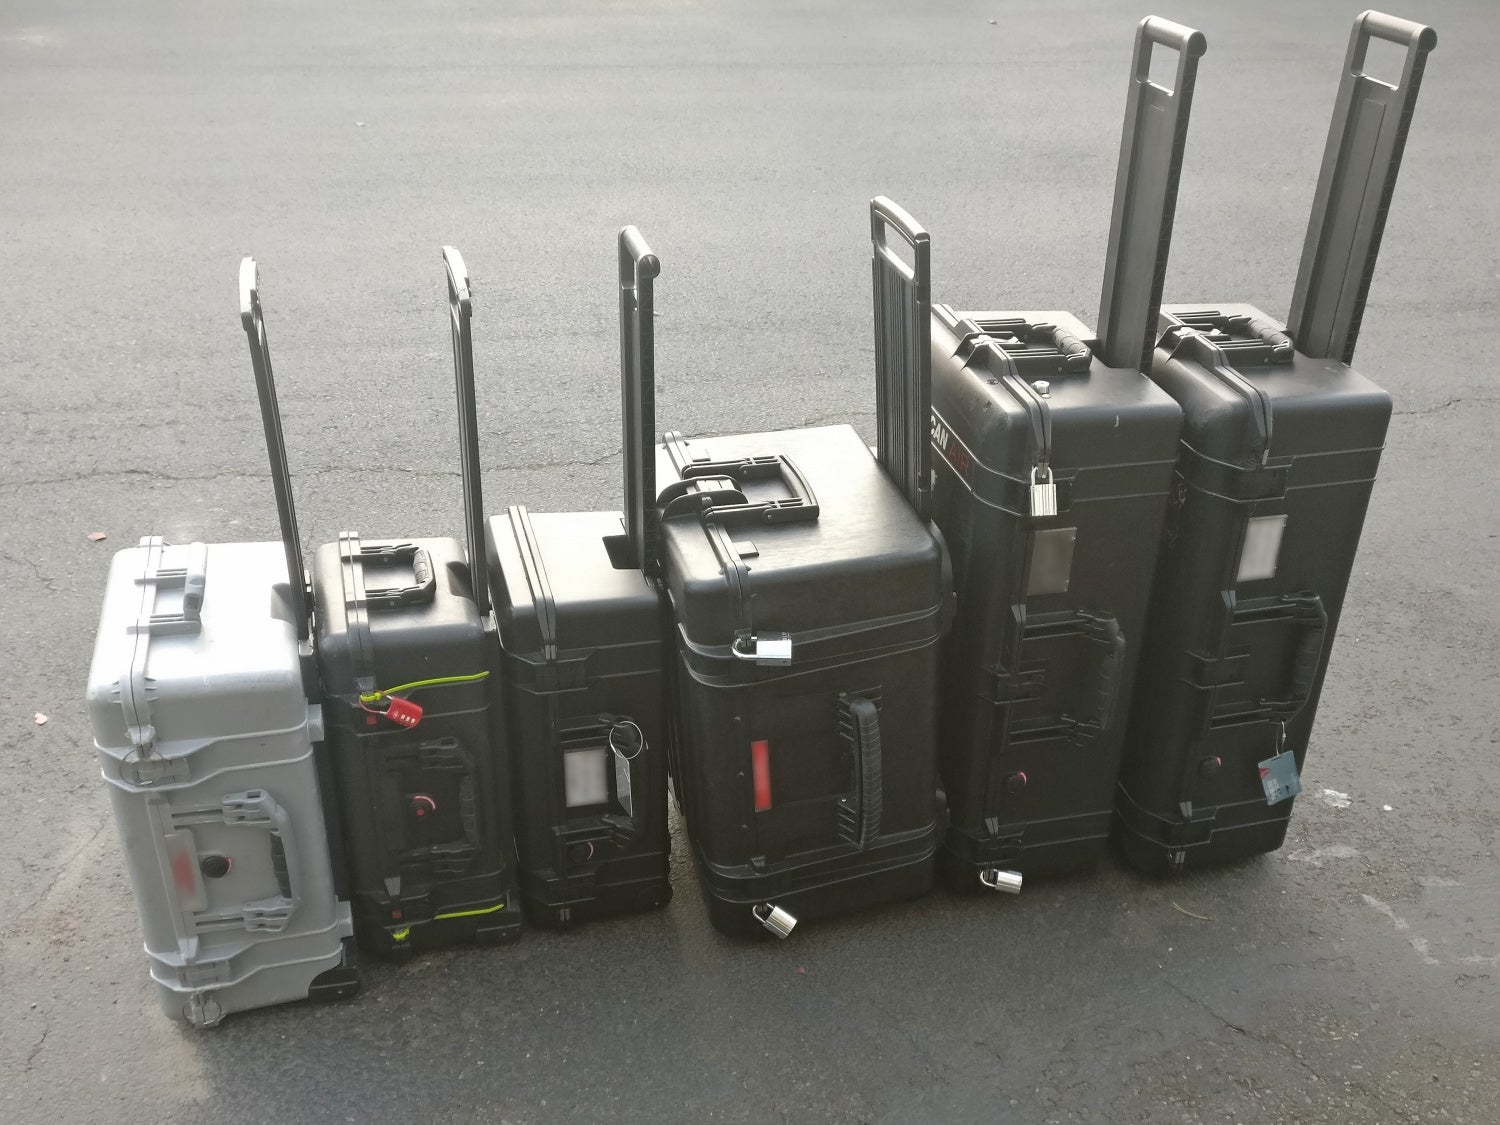 The Explorer Case model 5833 is positioned as a strong contender to compete with a variety of other products on the market.  It is seen here in the very middle of a line of various Pelican Protector, Pelican Storm, and Pelican Air cases owned by the author and his team.